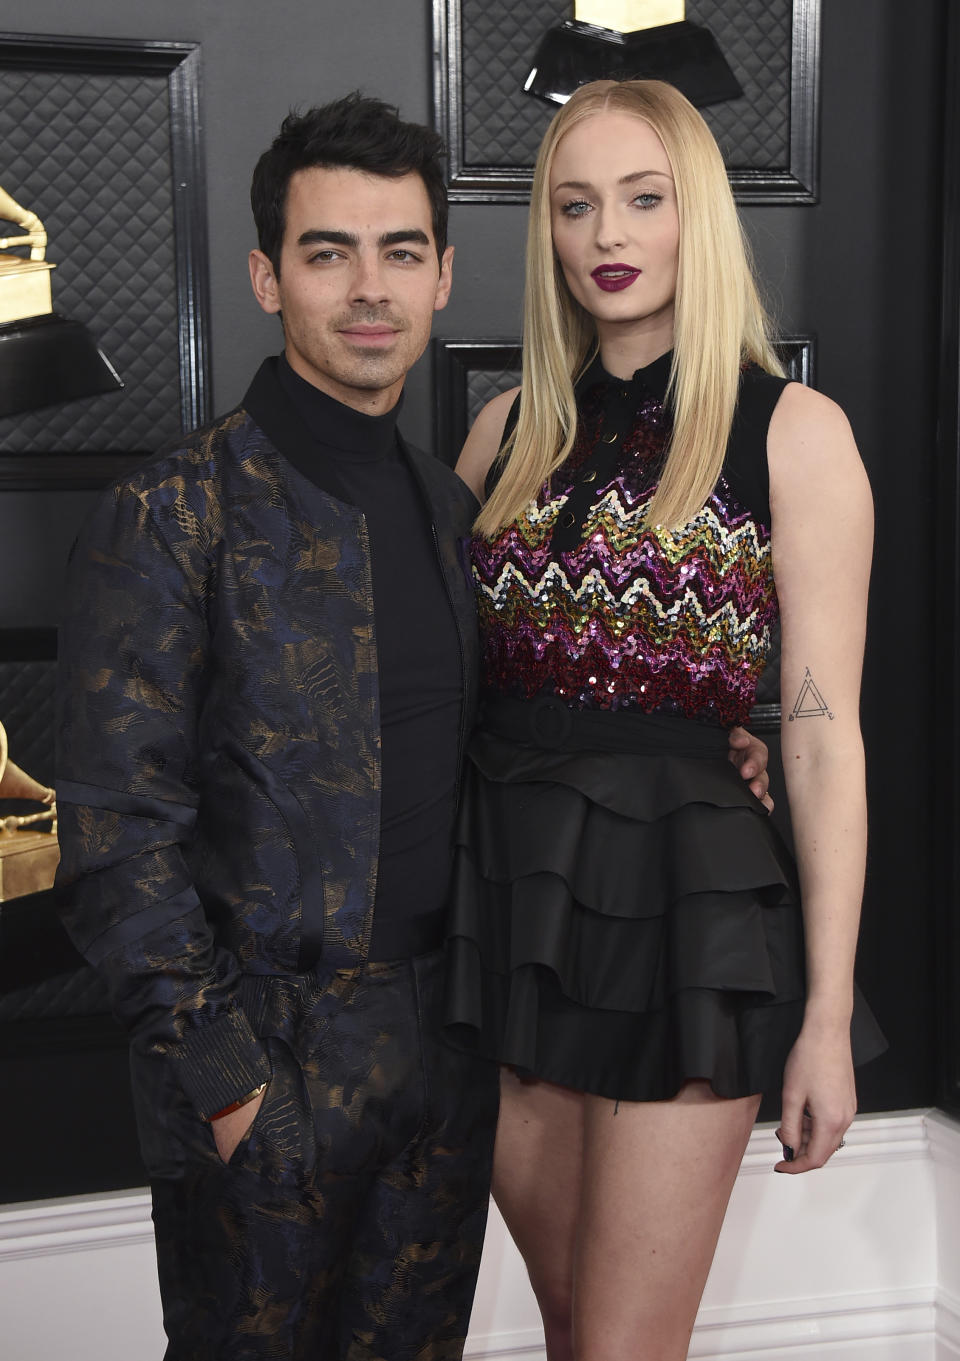 FILE - Joe Jonas, left, Sophie Turner arrive at the 62nd annual Grammy Awards in Los Angeles on Jan. 26, 2020. Turner and Joe Jonas have had their first child. The 24-year-old “Game of Thrones” star Turner and the 30-year-old singer Jonas announced the birth Monday. In a joint statement released by his label Republic Records, the two said only that they are "delighted to announce the birth of their baby.” They gave no further details on the child. (Photo by Jordan Strauss/Invision/AP, File)